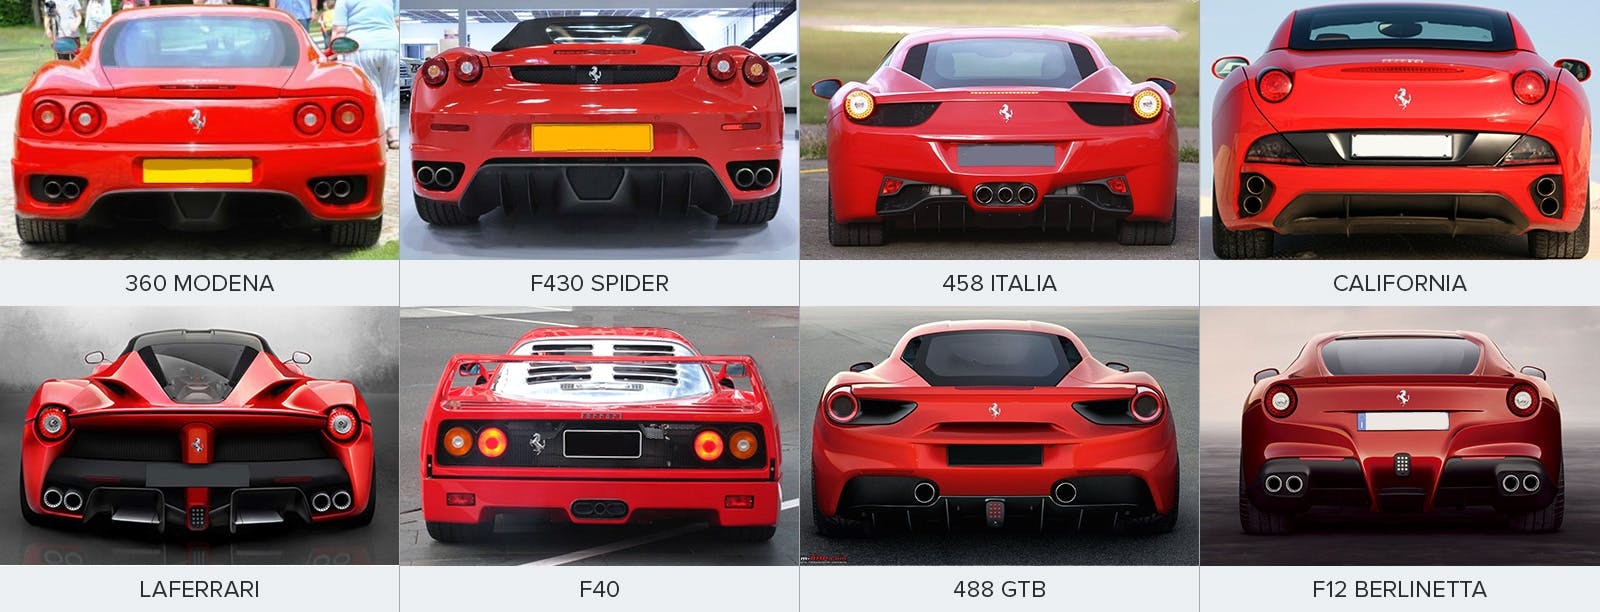 Ferrari Models: How To Tell The Difference